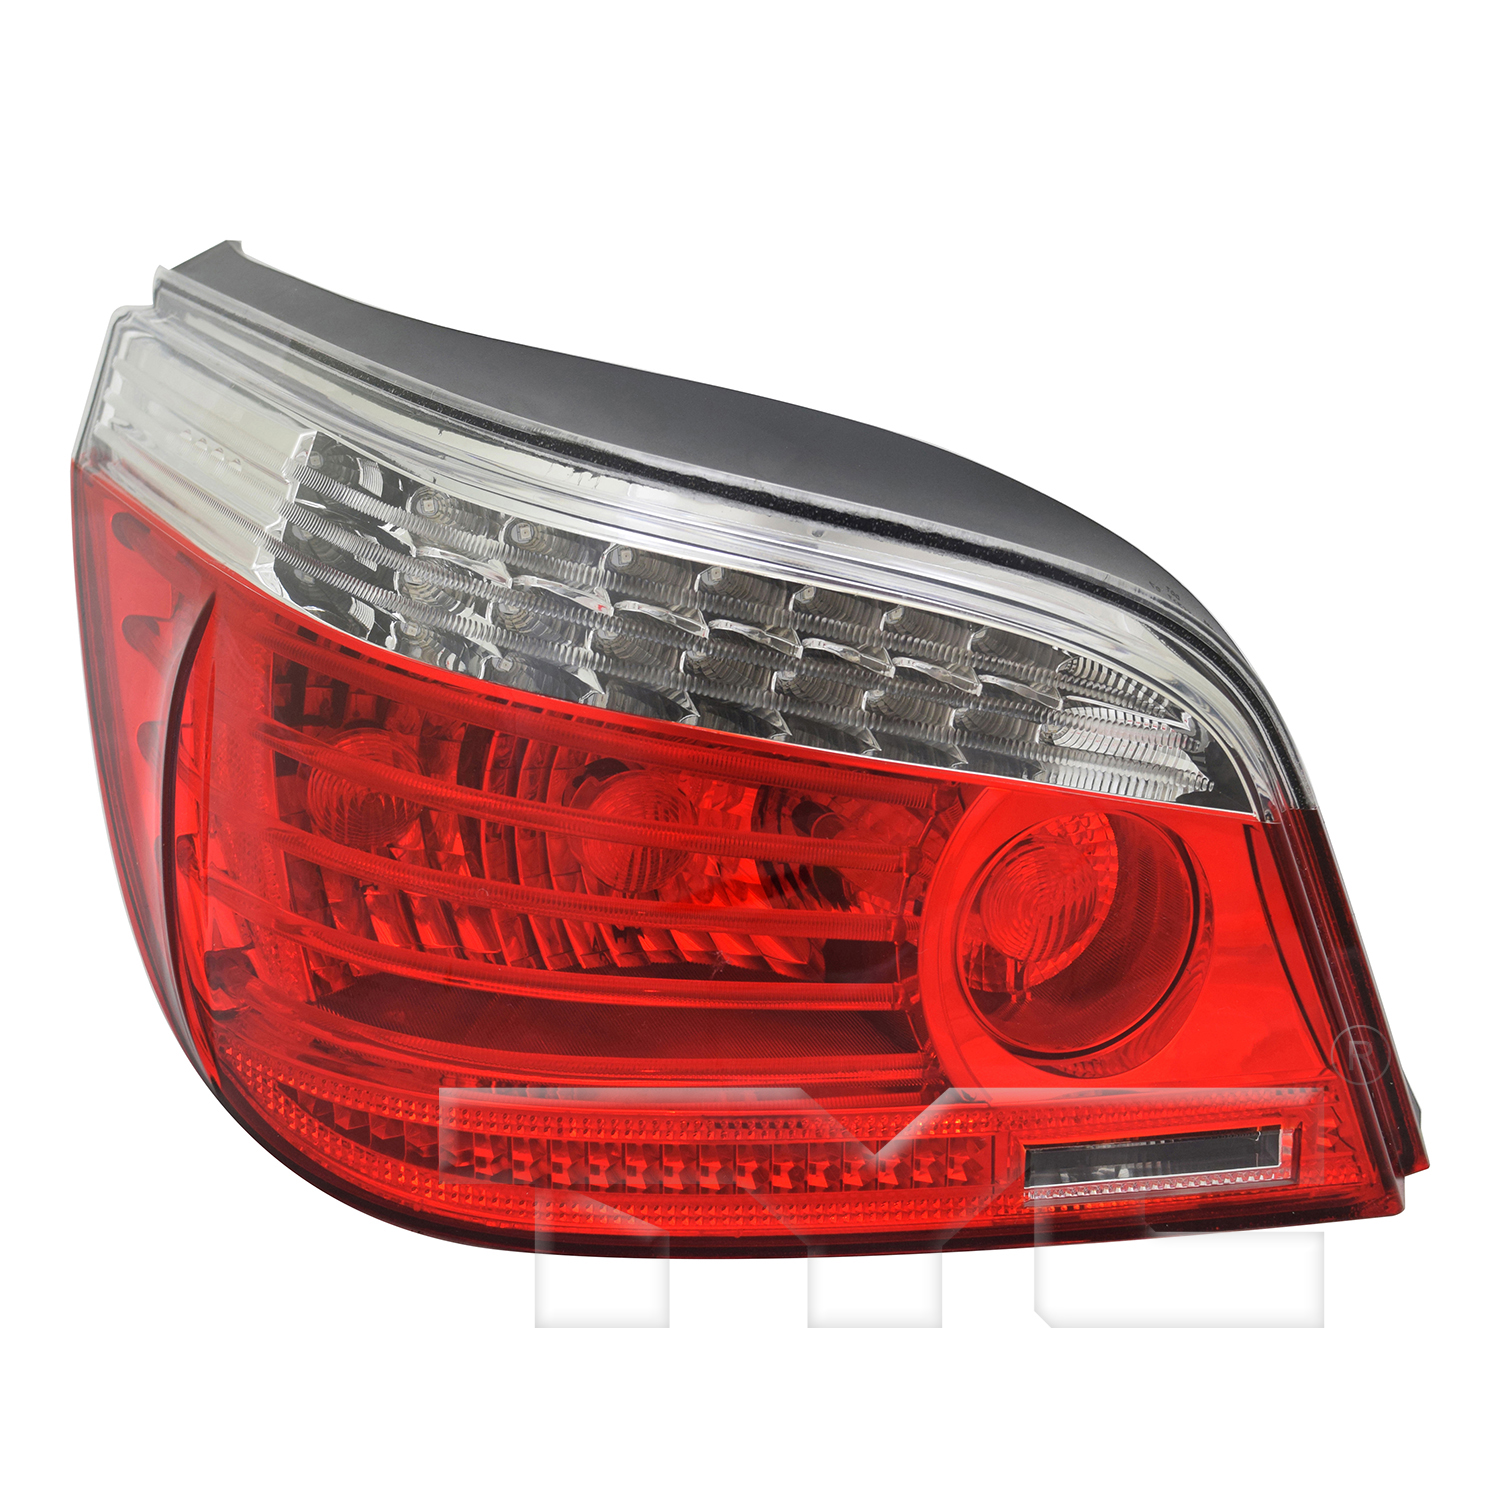 Aftermarket TAILLIGHTS for BMW - 528I, 528i,08-10,LT Taillamp assy